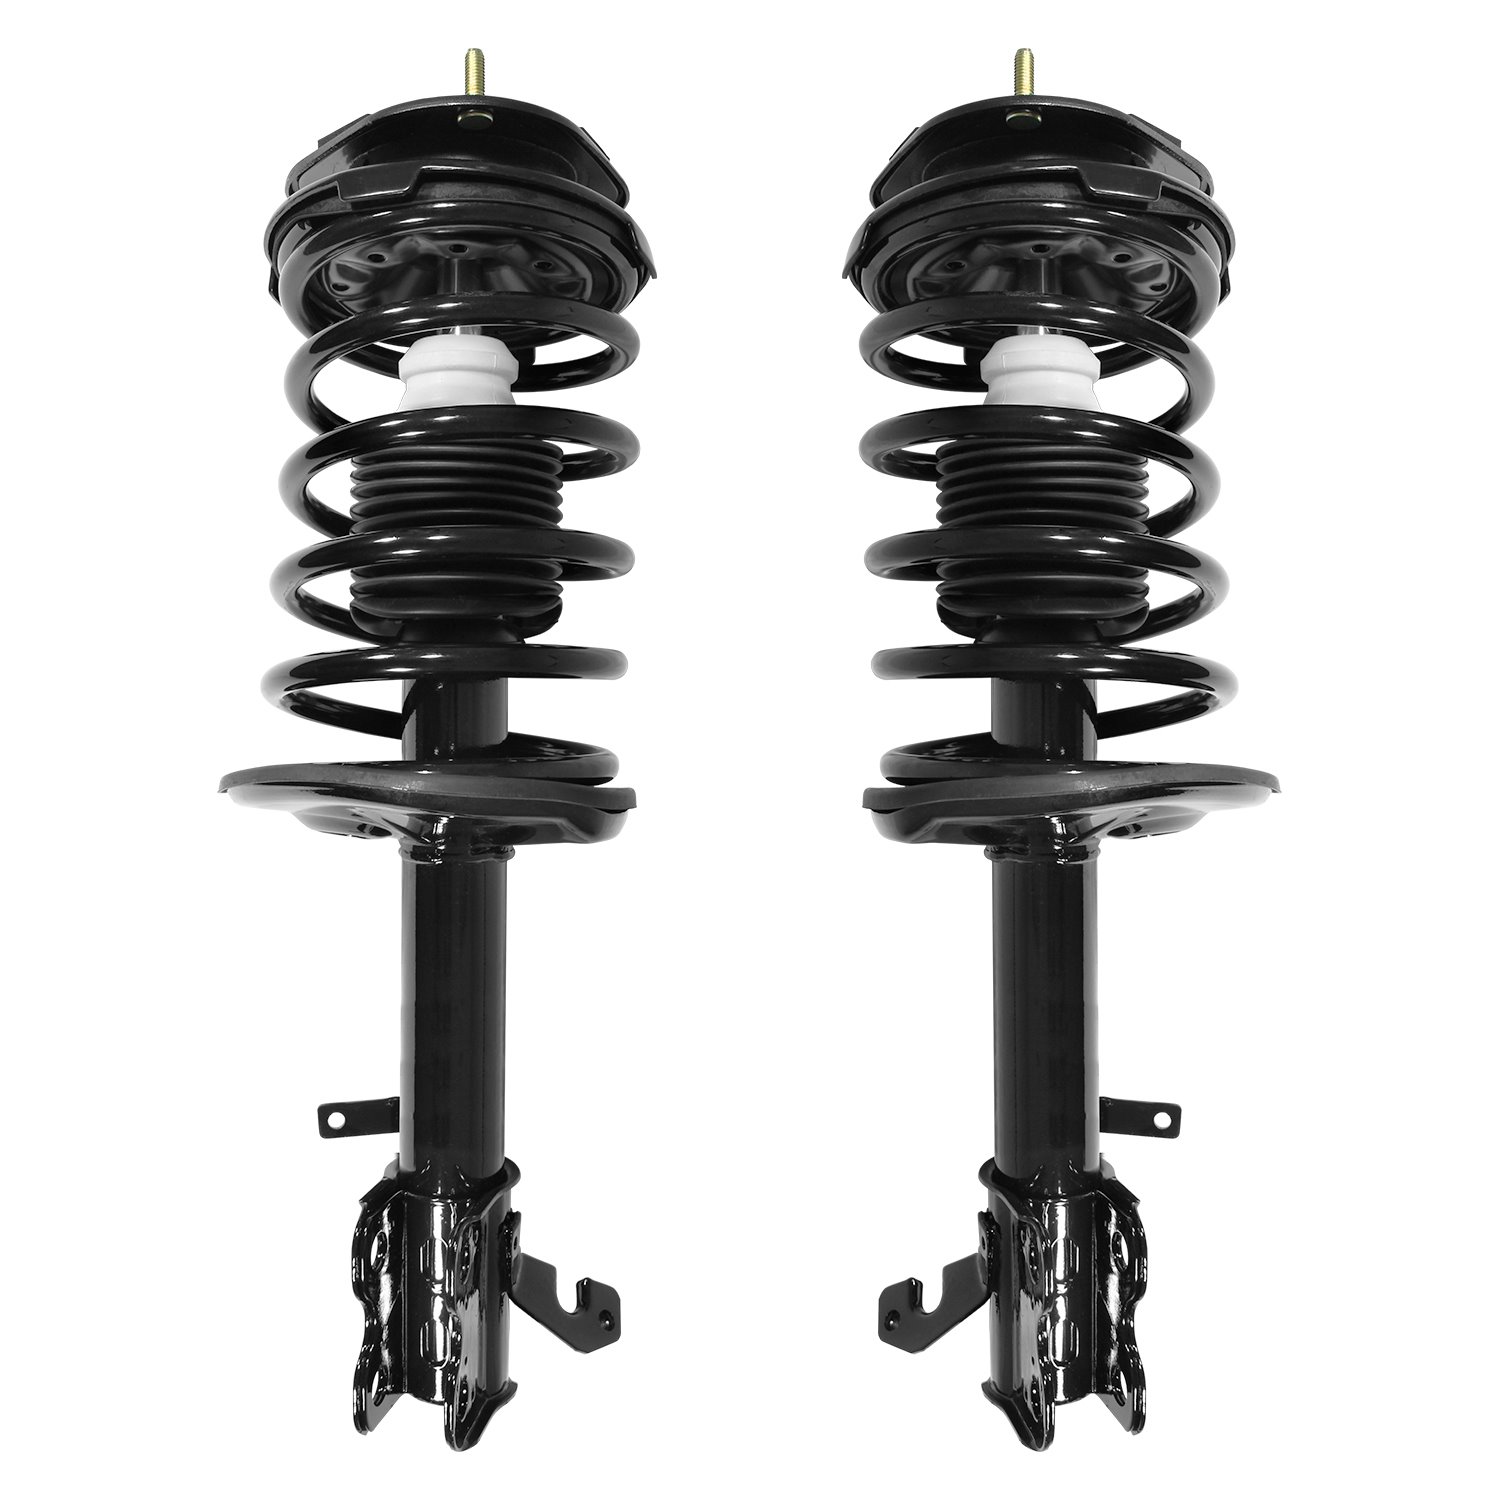 2-11151-11152-001 Suspension Strut & Coil Spring Assembly Set Fits Select Chevy Prizm, Toyota Corolla